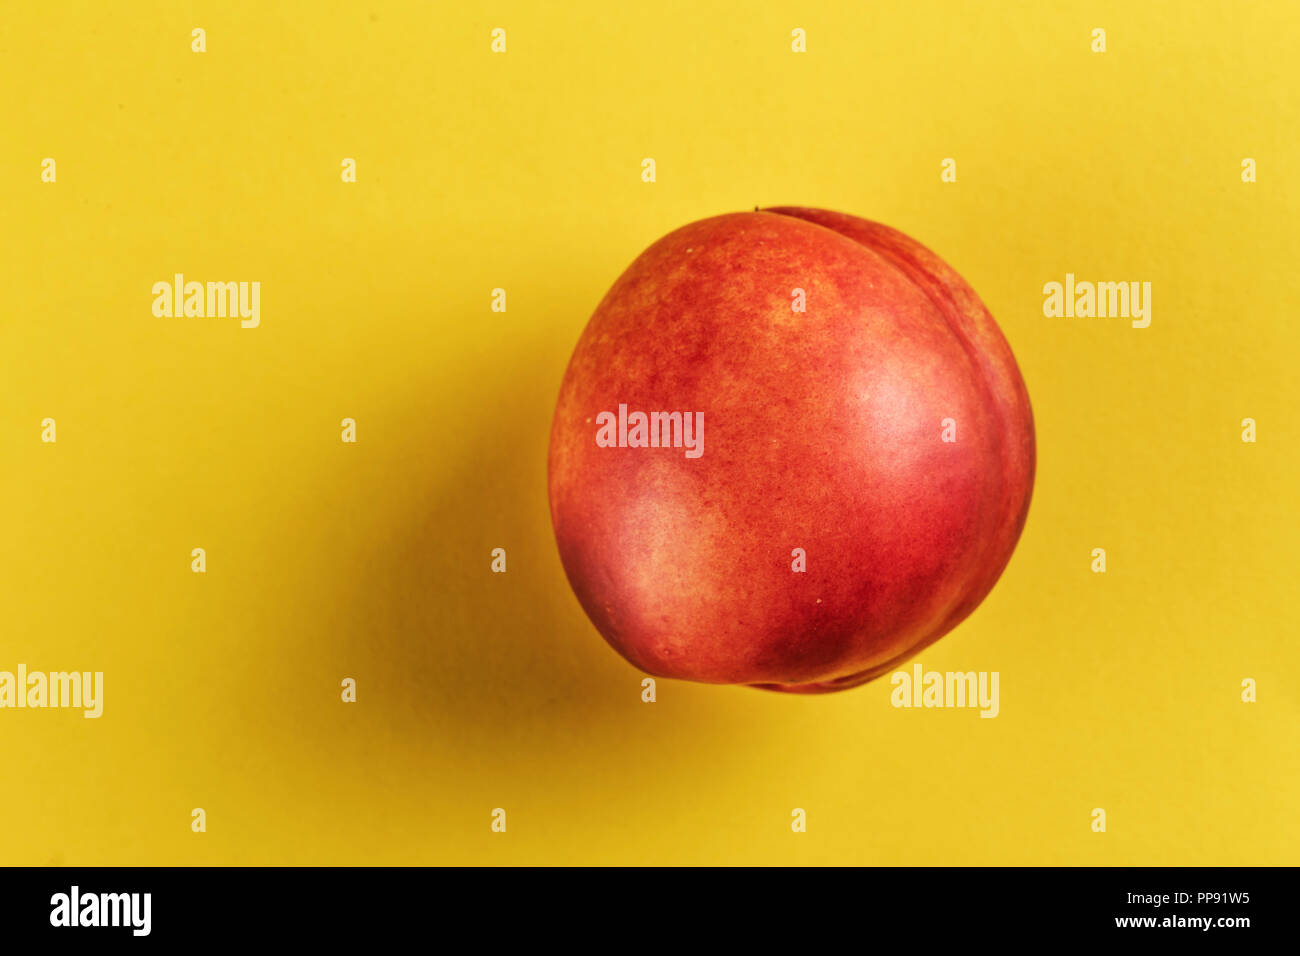 ripe nectarine on a yellow background, space for text. Stock Photo